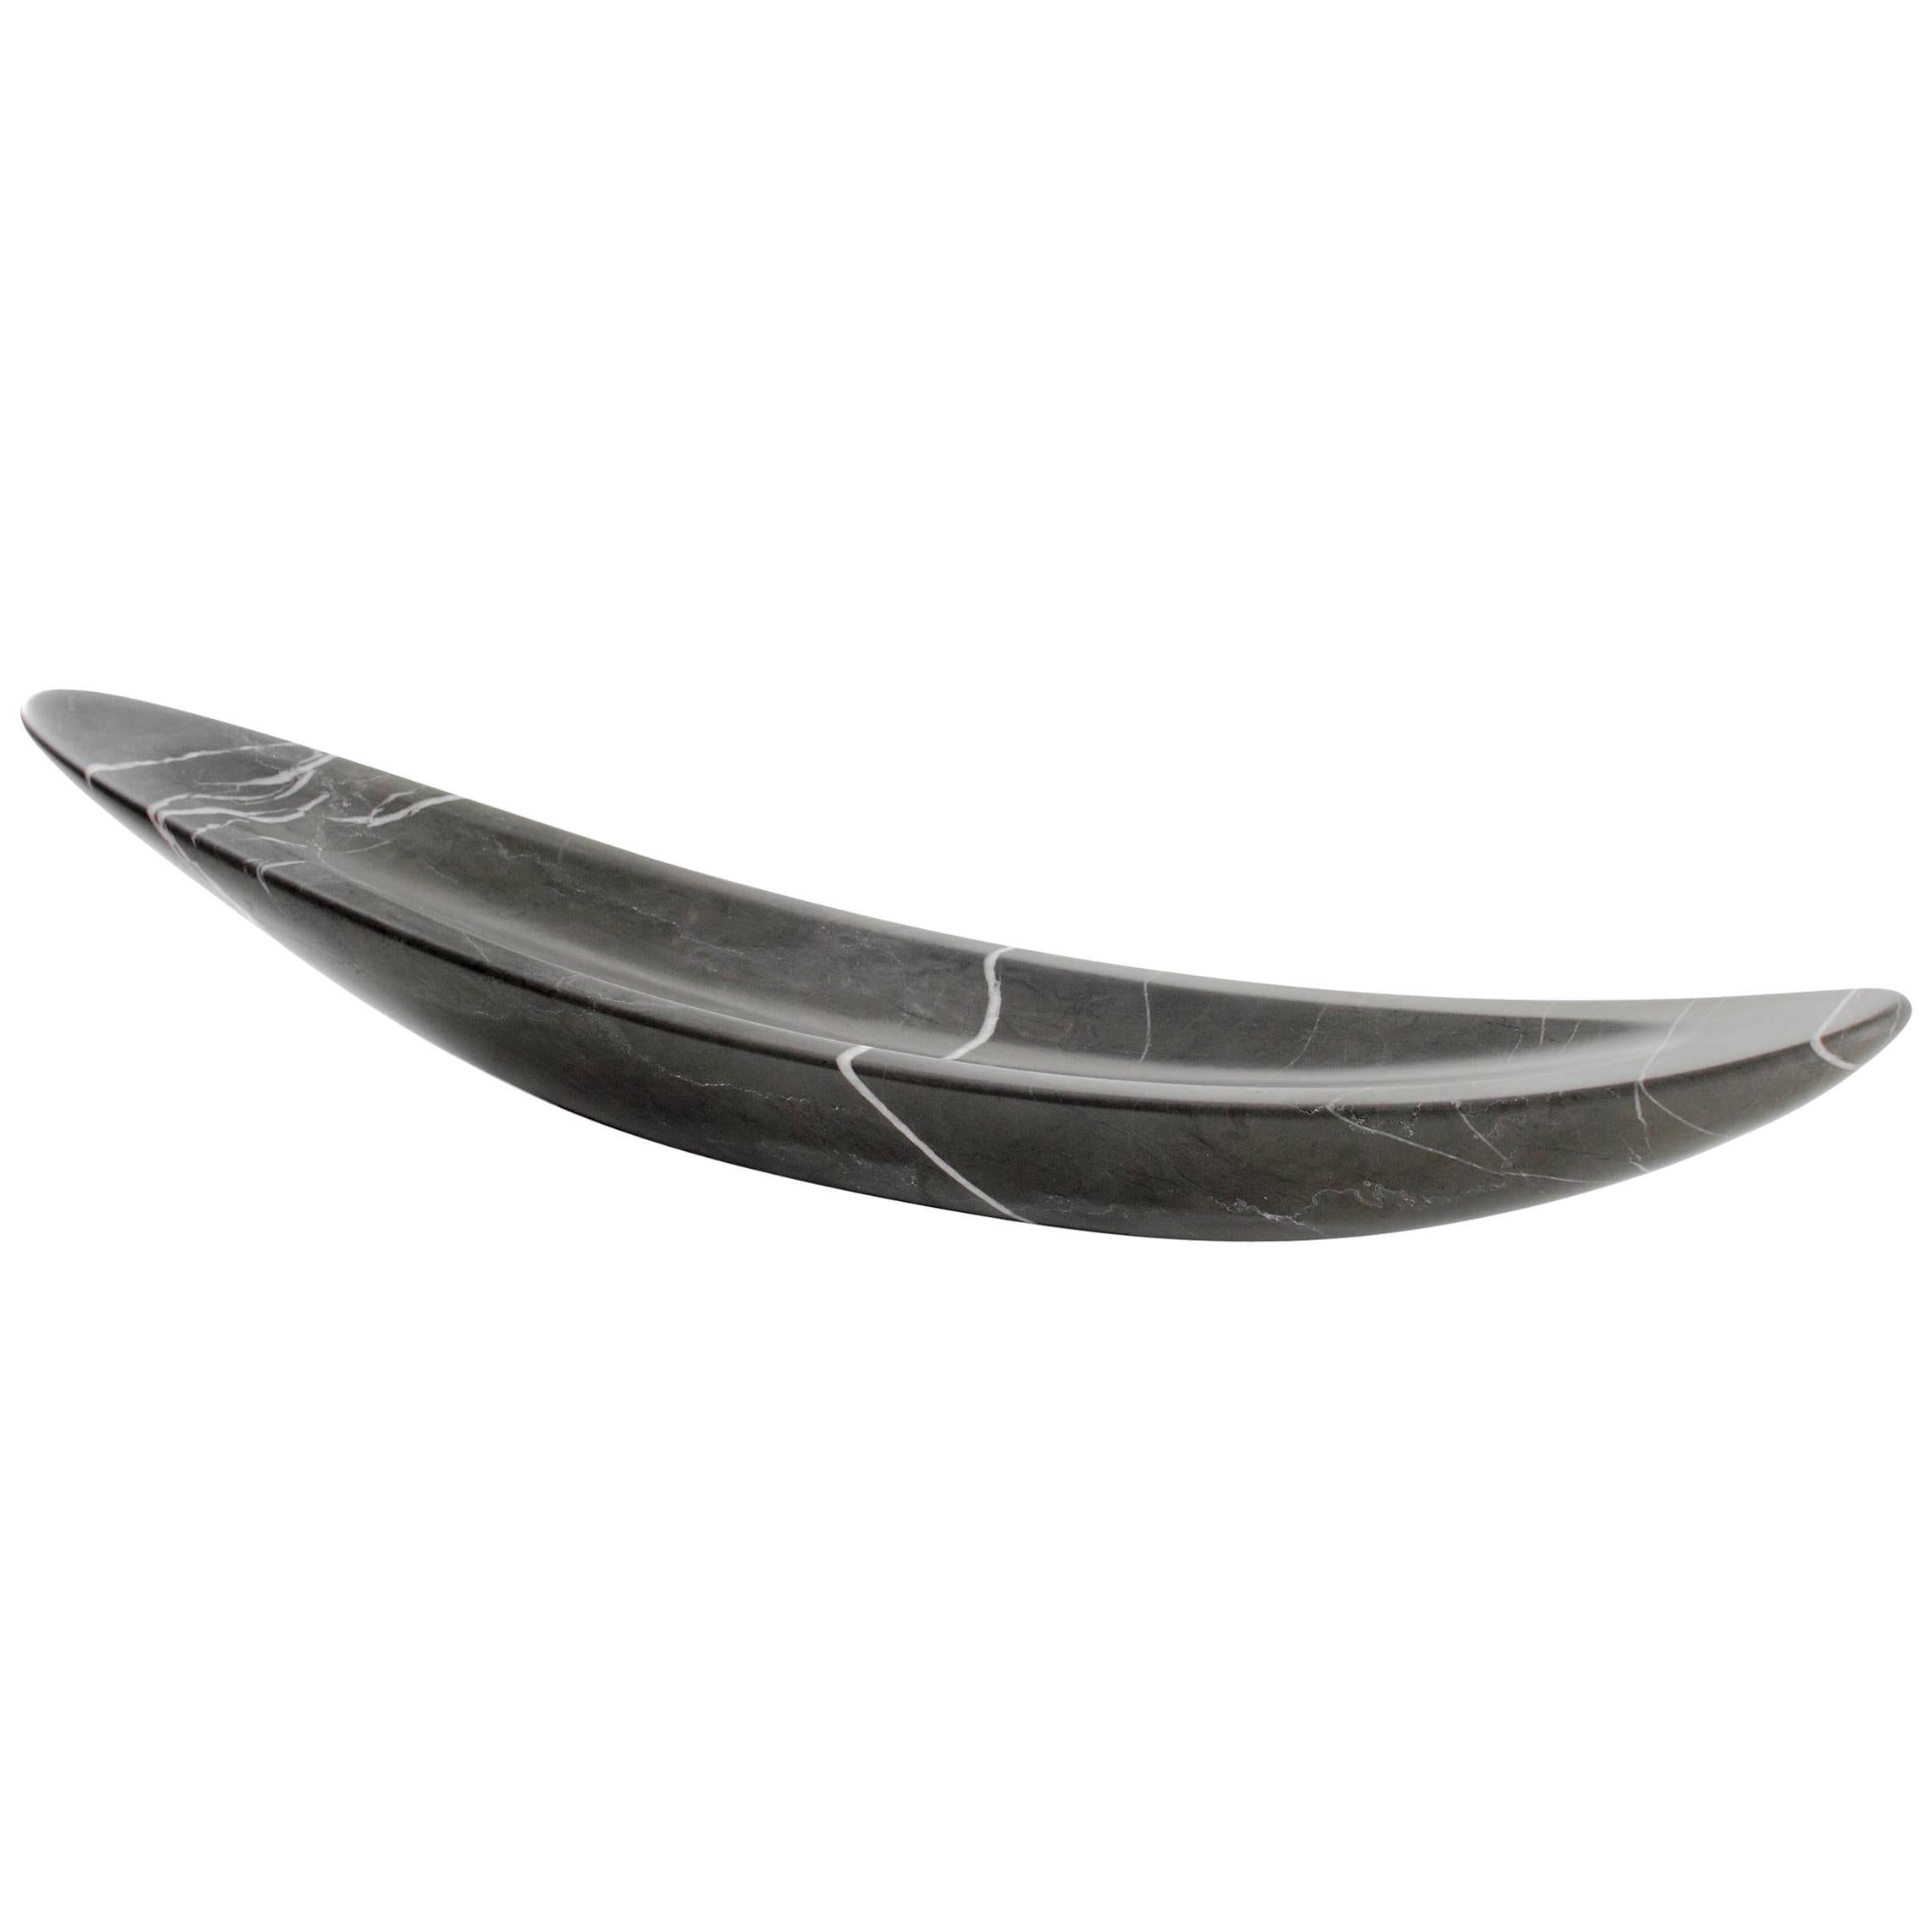 Decorative Bowl Centerpiece Vessel Sculpture in Imperial Grey Marble Handmade  For Sale